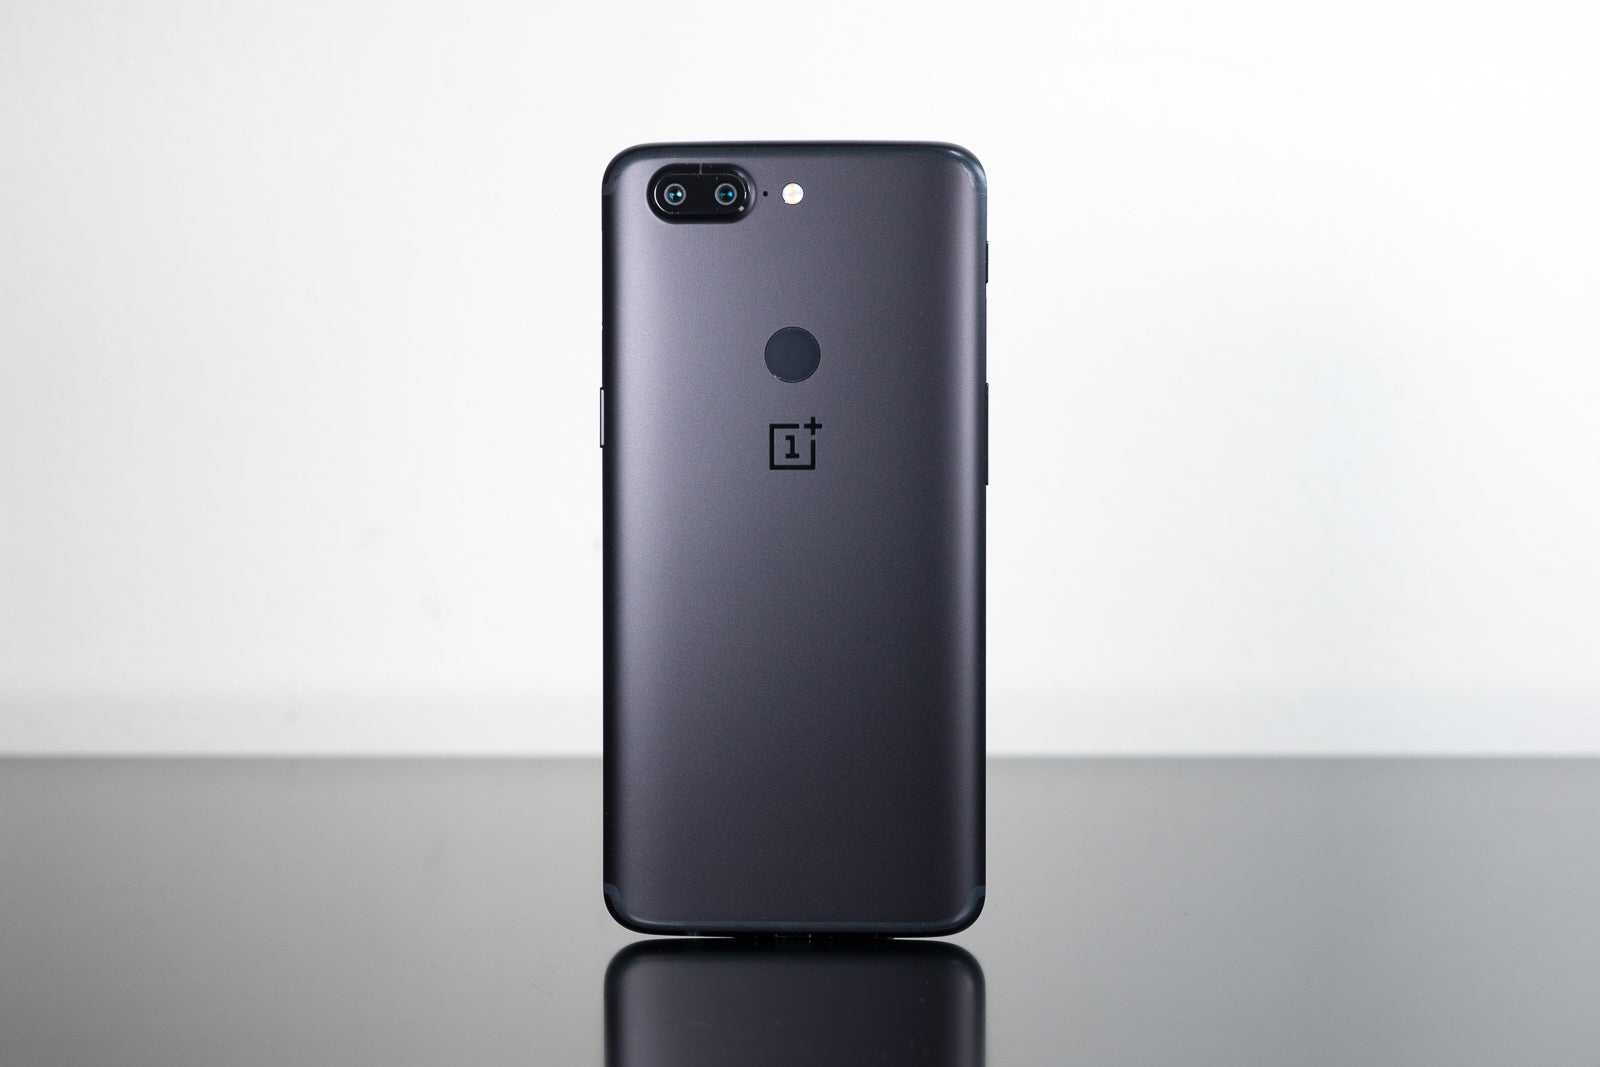 OnePlus 5T gets new update with improvements to photo quality, camera app, face unlock, and more